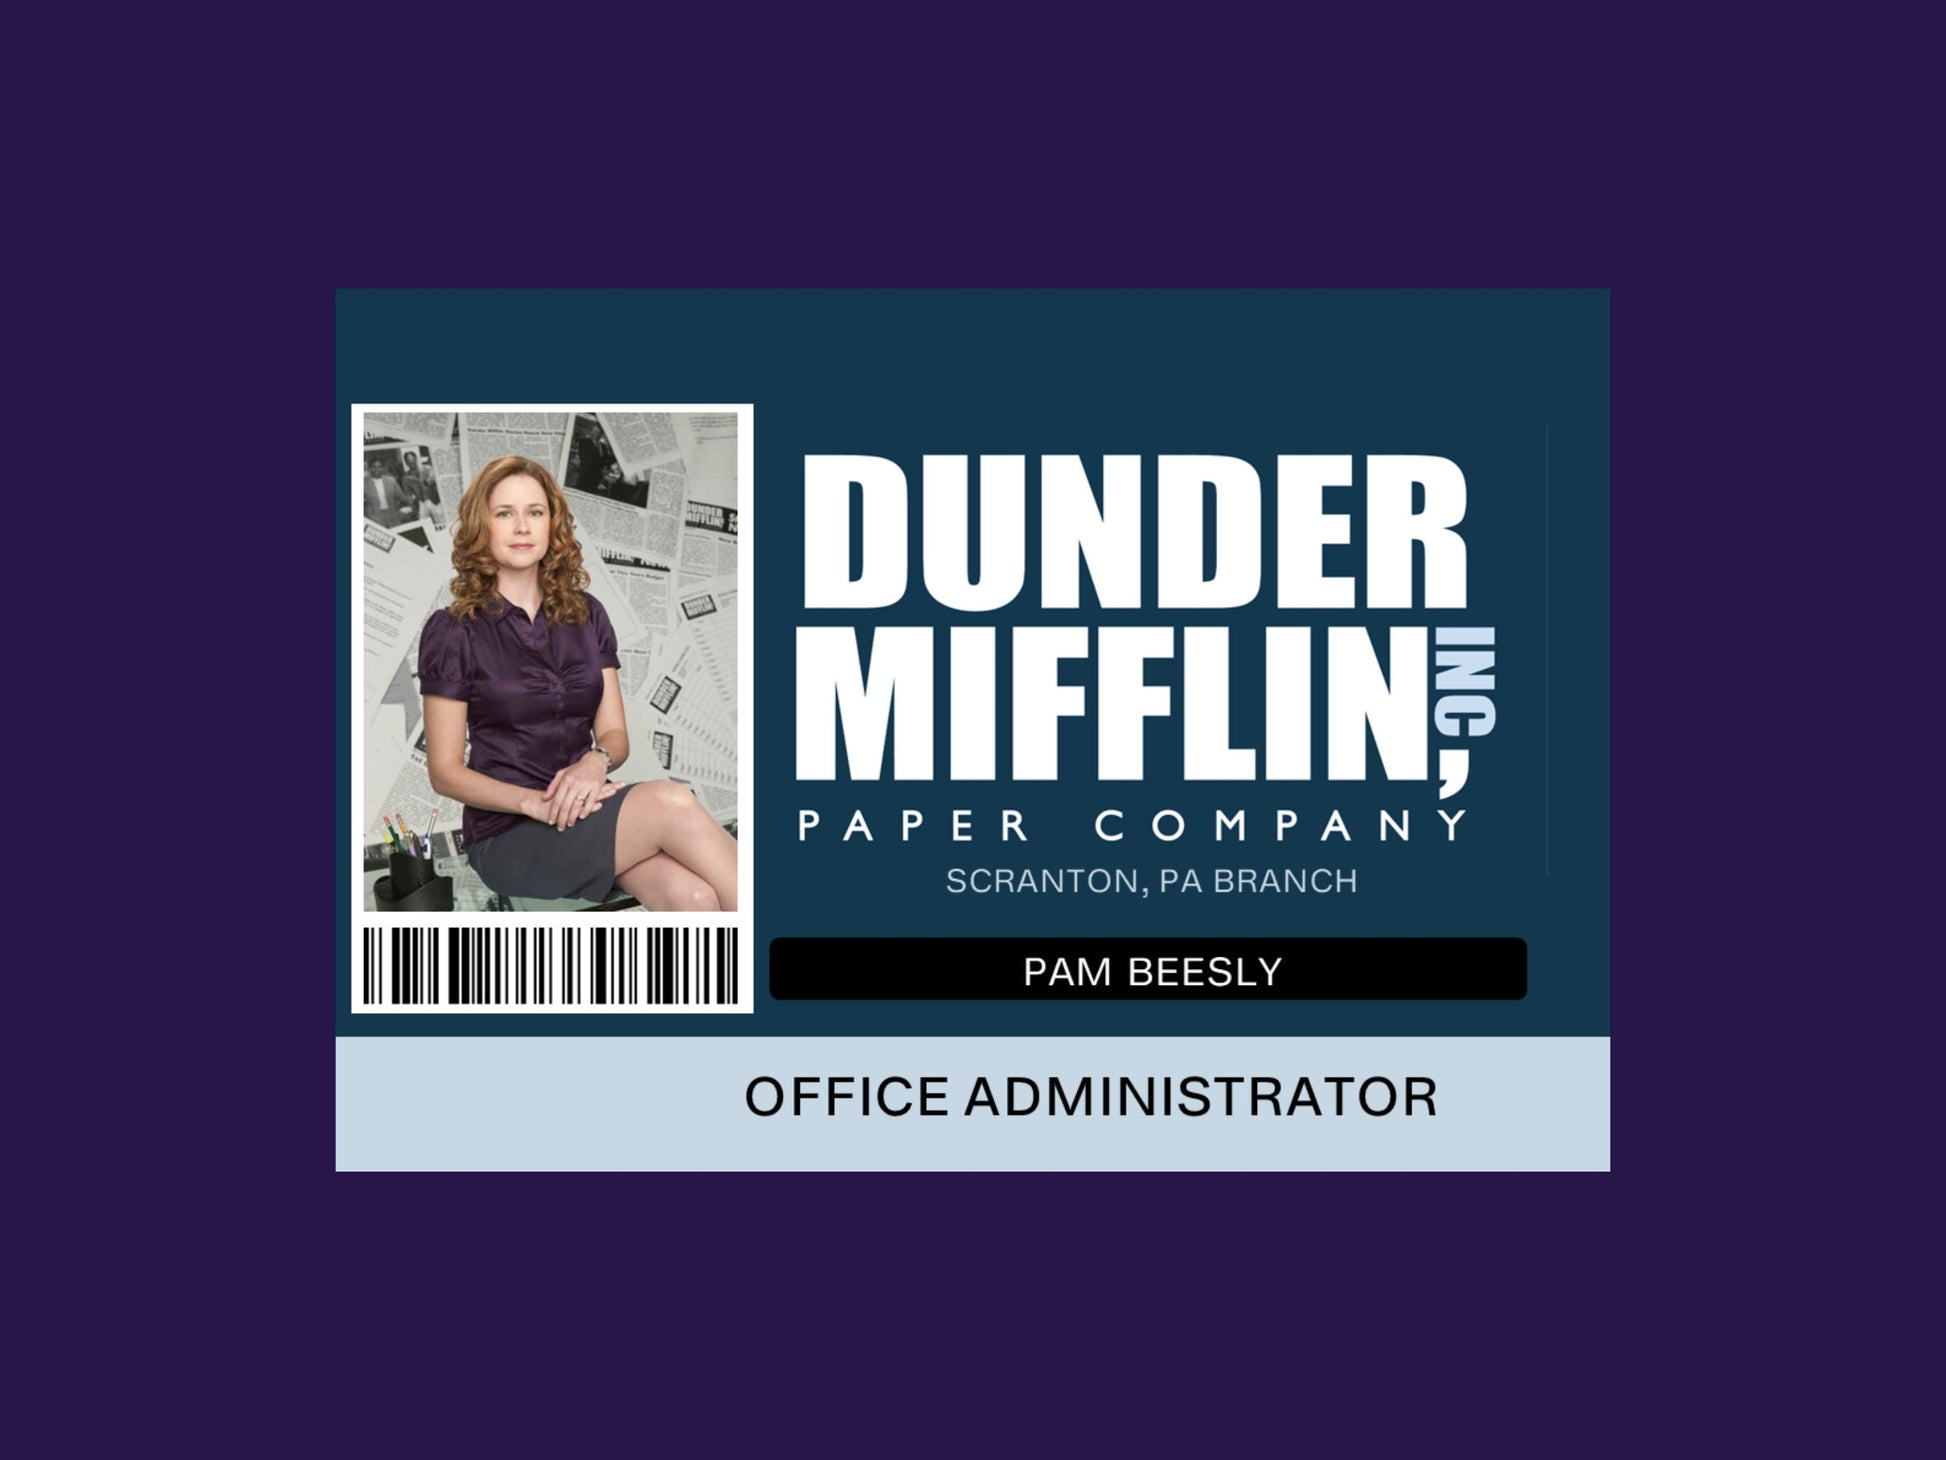 Dunder Mifflin, this is Pam. | Greeting Card